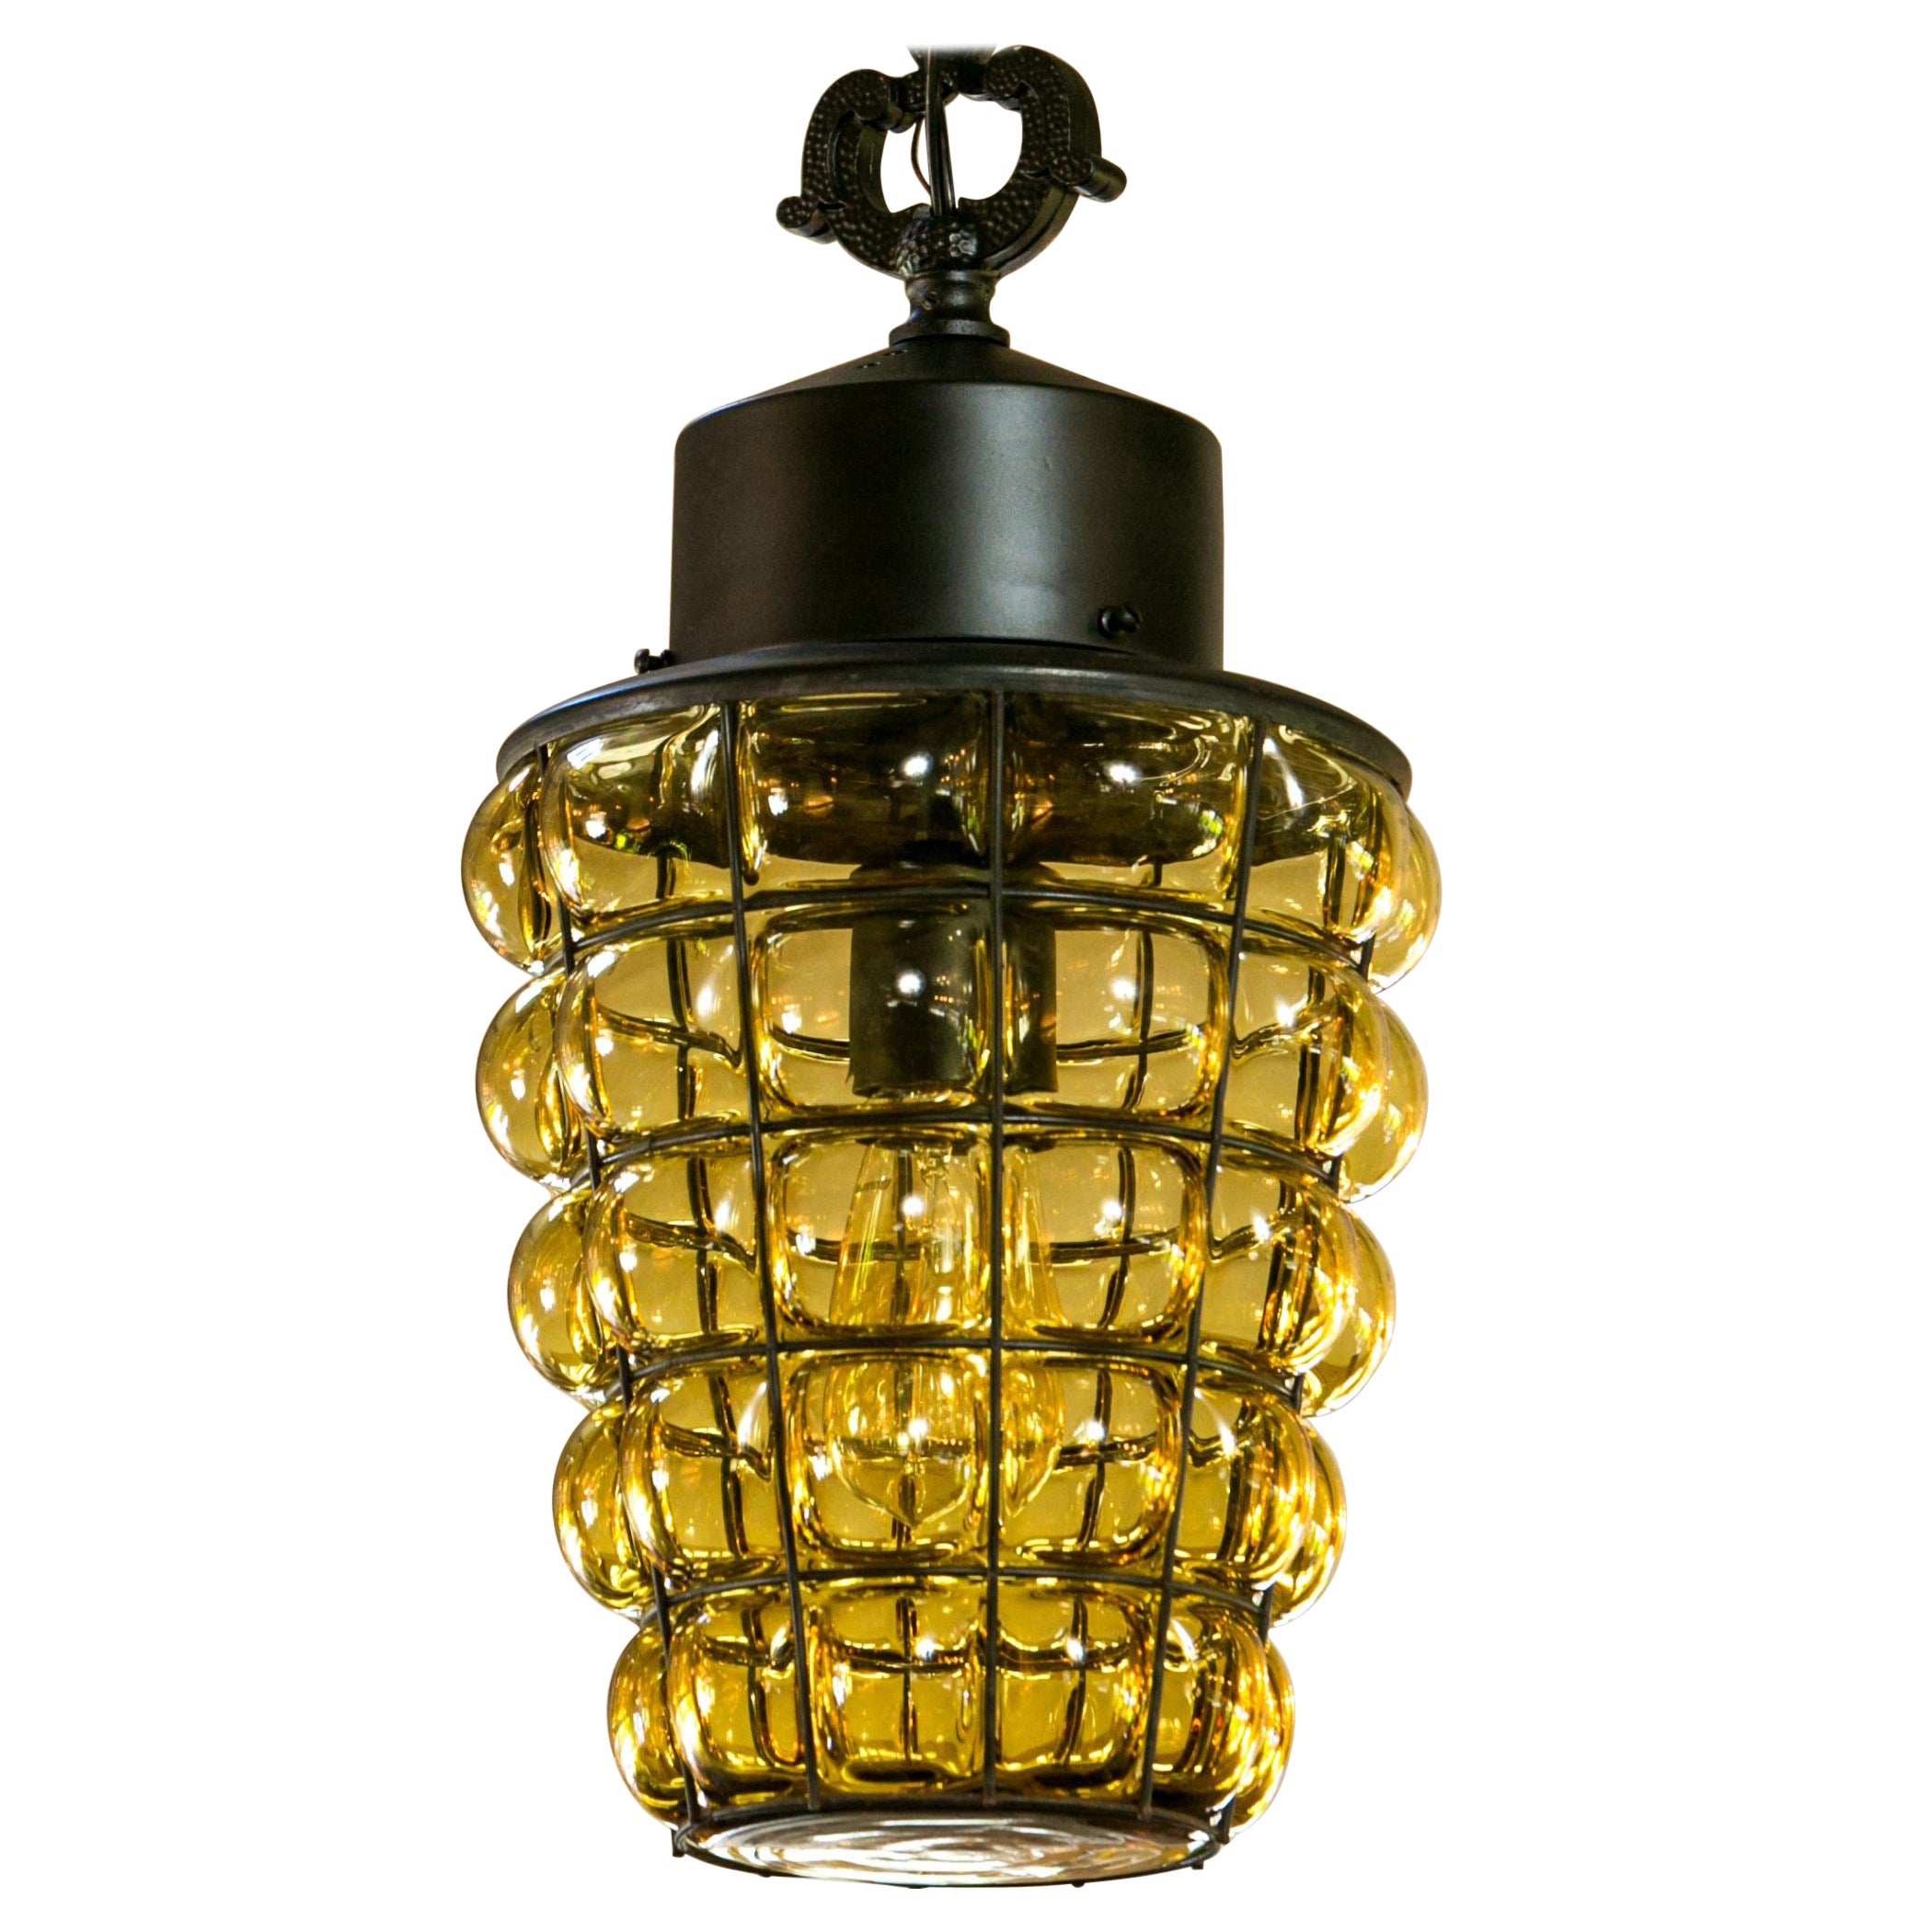 Spanish Honeycomb-Style Caged Glass Lantern For Sale